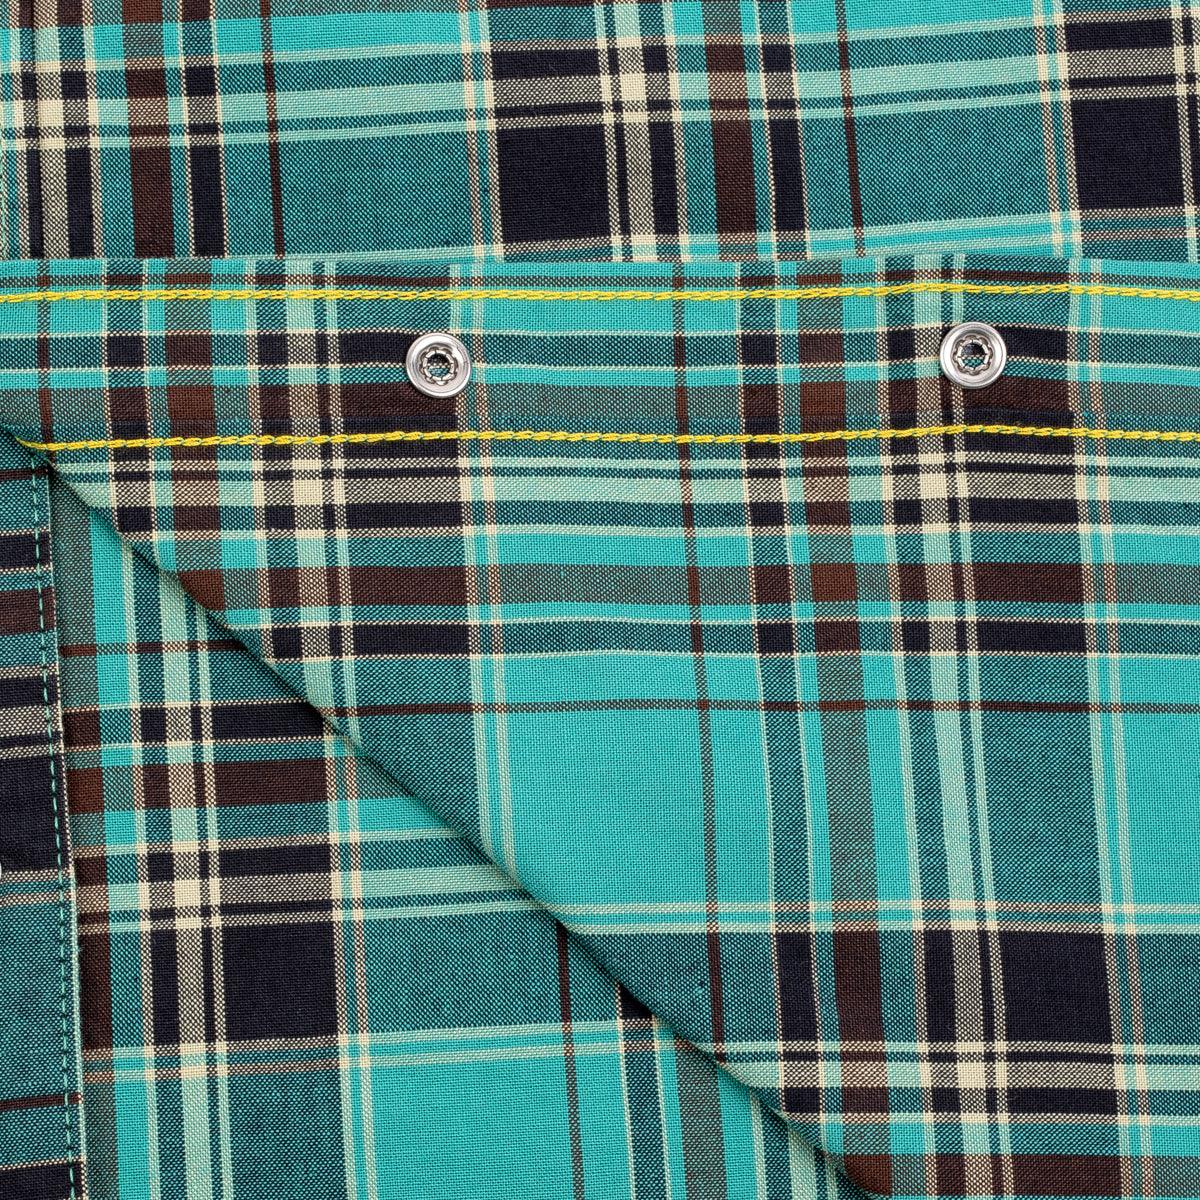 Image showing the IHSH-355-GRN - 5oz Selvedge Madras Check Western Shirt - Green which is a Shirts described by the following info Bargain, Released and sold on the IRON HEART GERMANY online store